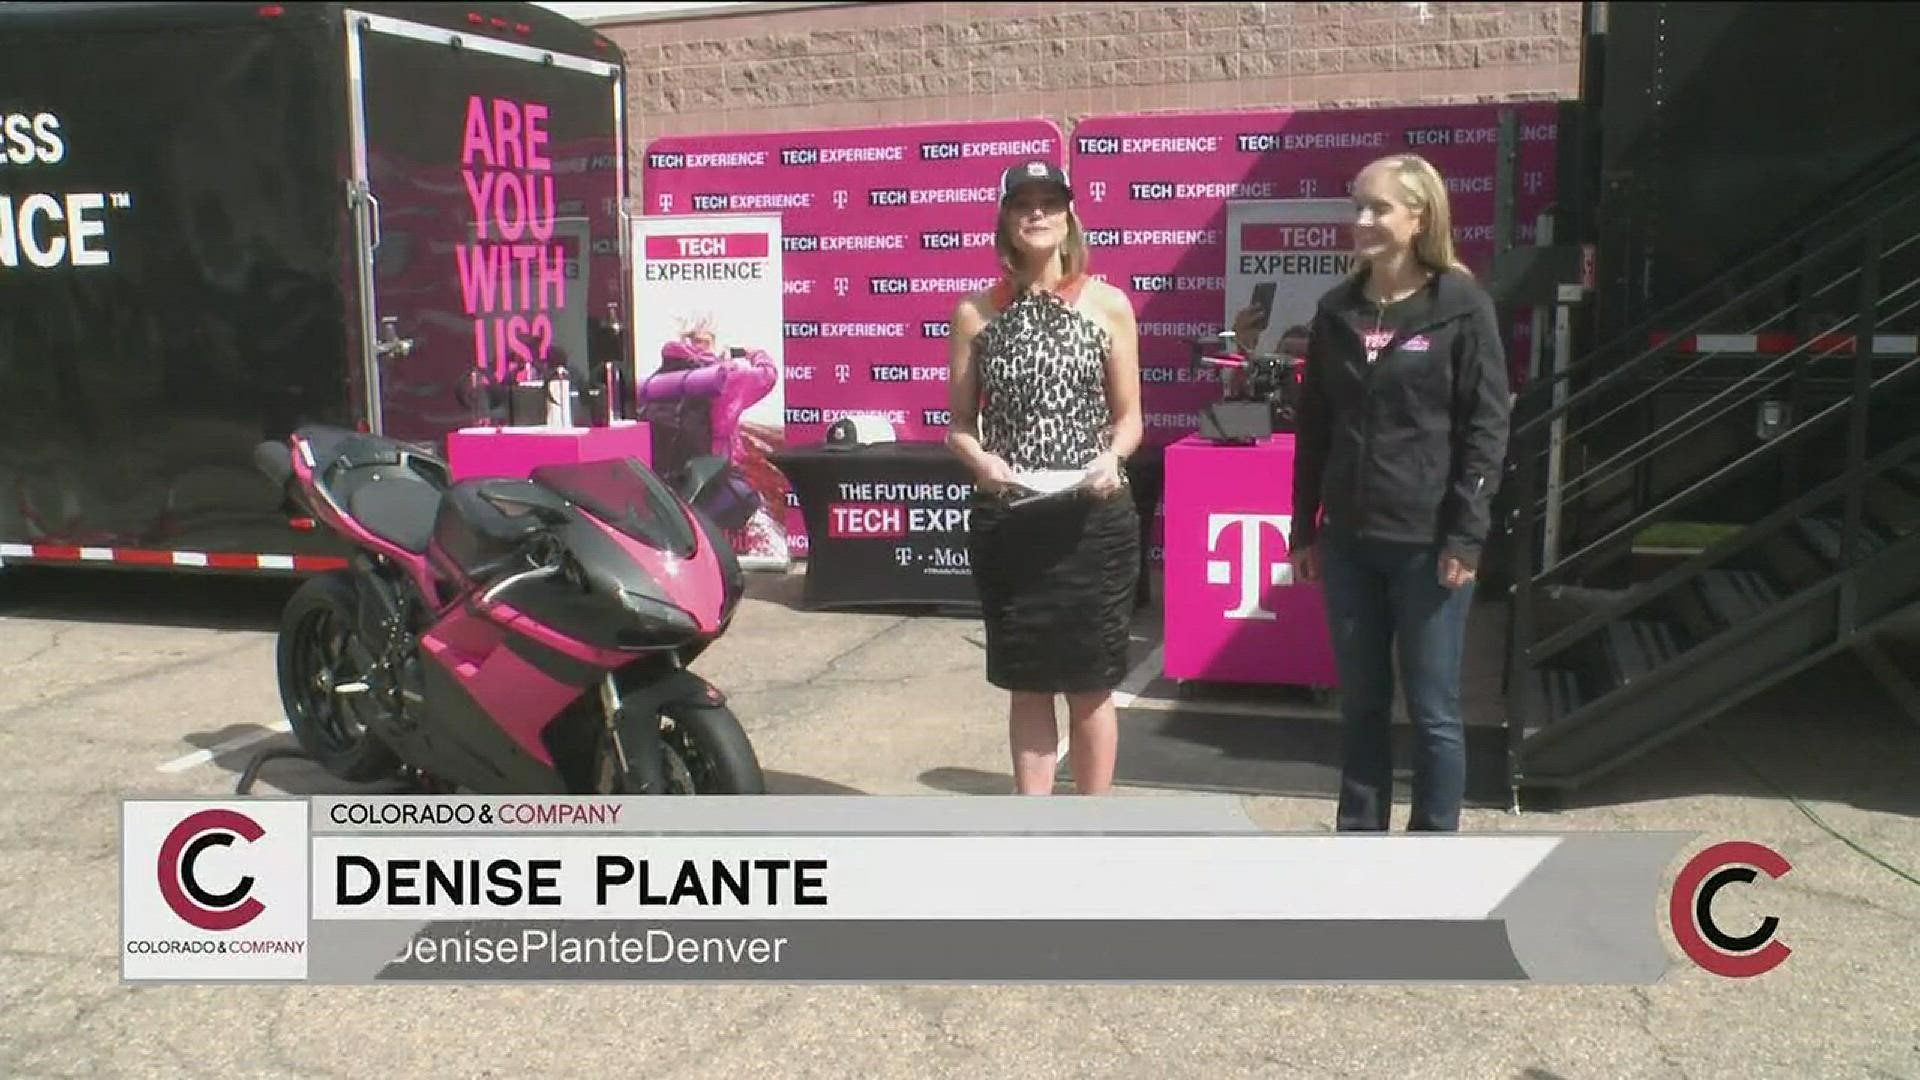 Learn more about T-Mobile 5G at www.T-Mobile.com. You can follow the Future of Wireless Truck at #T-MobileTechTruck. 
THIS INTERVIEW HAS COMMERCIAL CONTENT. PRODUCTS AND SERVICES FEATURED APPEAR AS PAID ADVERTISING.